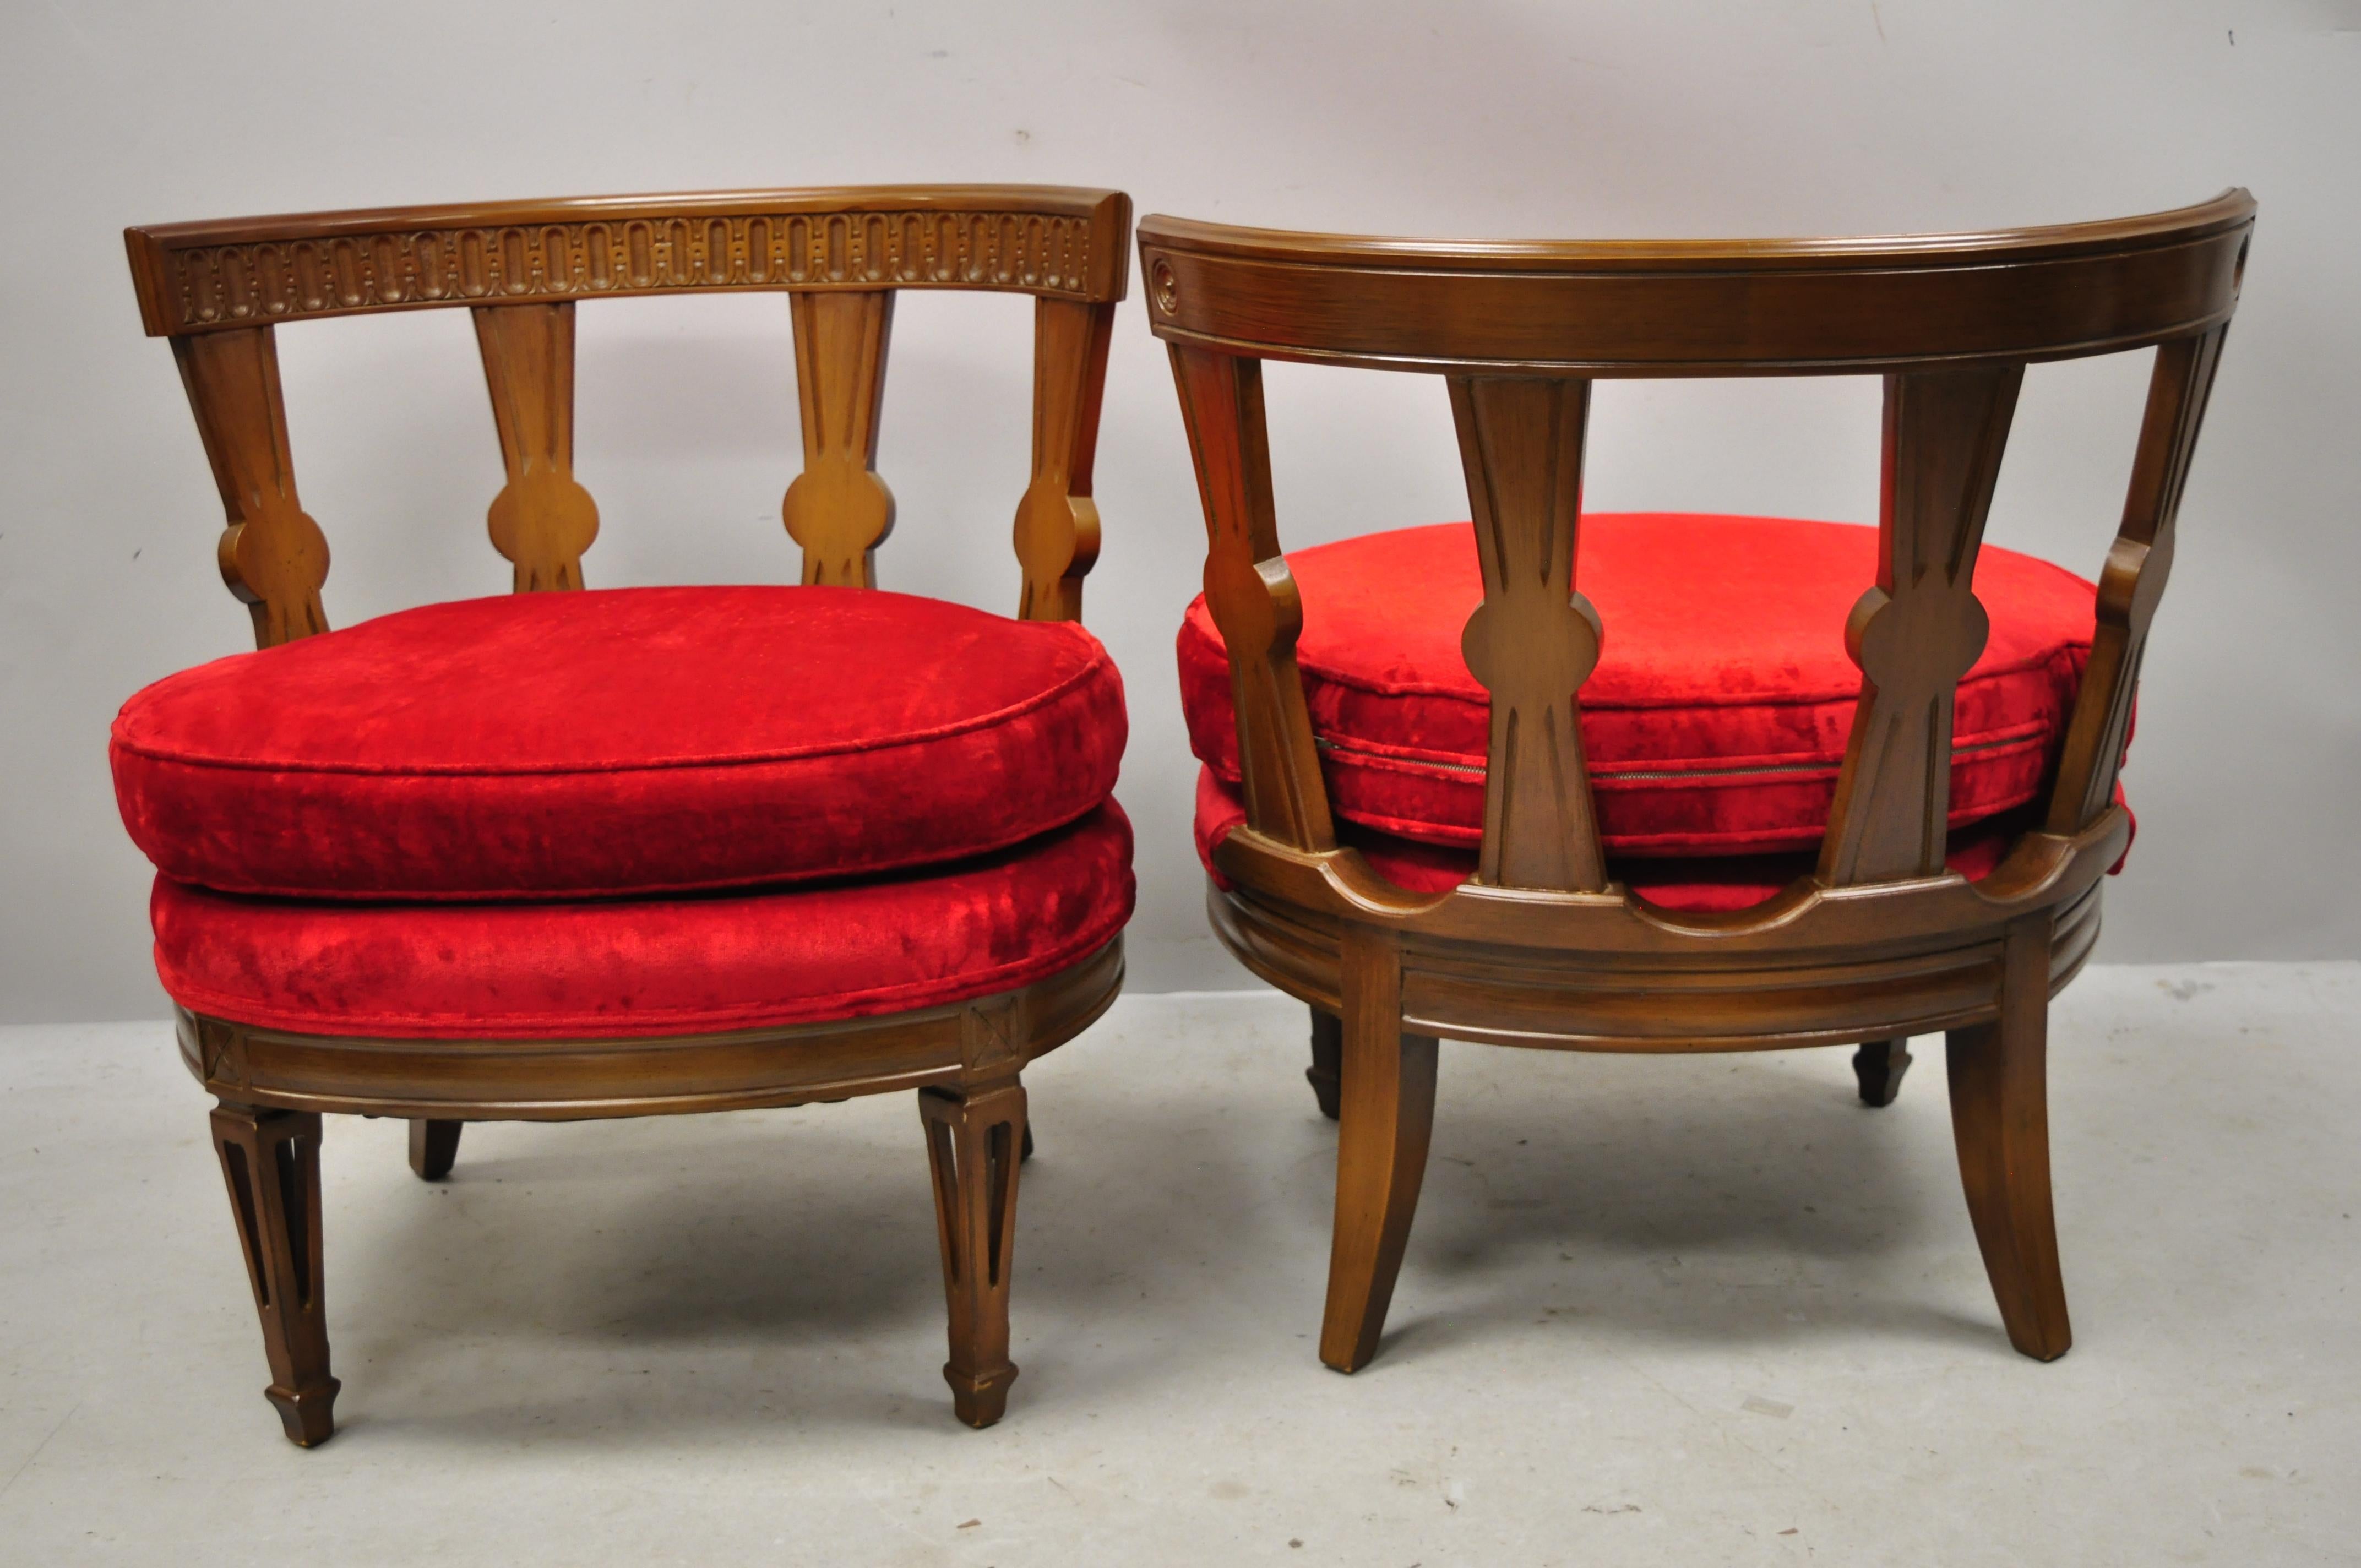  Hollywood Regency Italian Low Barrel Back Red Slipper Lounge Chairs - a Pair 2